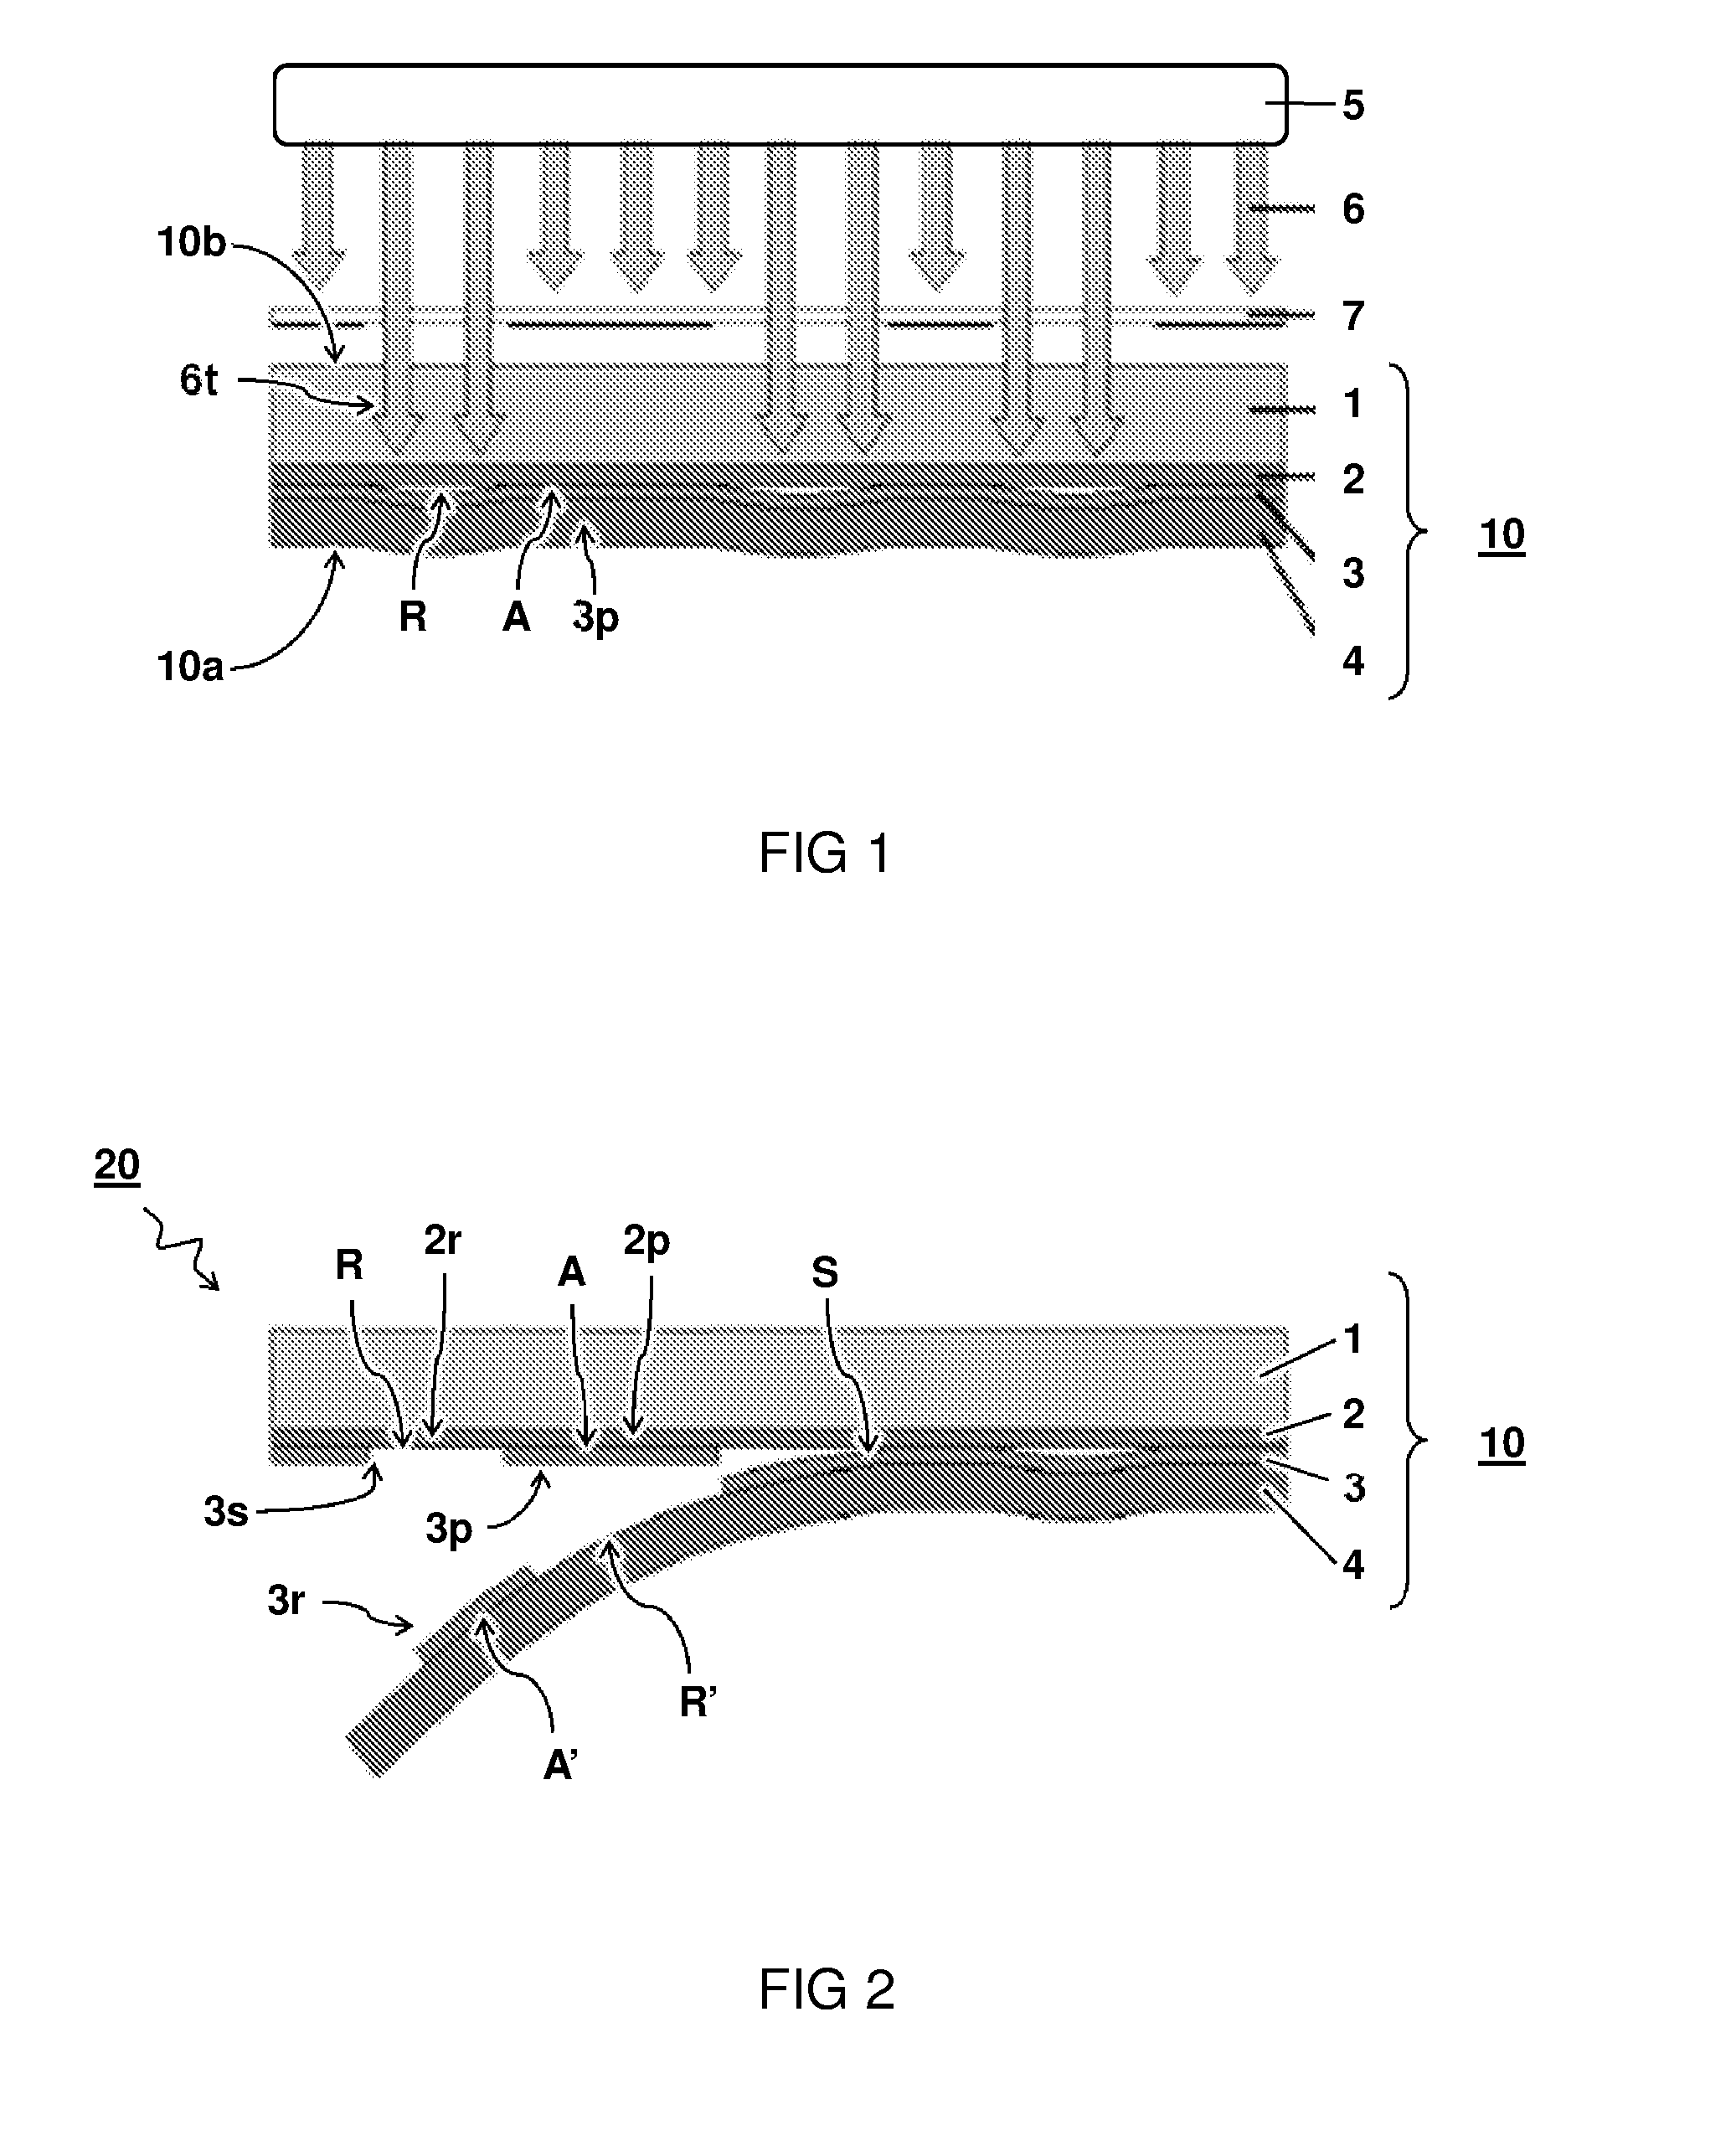 Substrate comprising an electrical circuit pattern, method and system for providing same